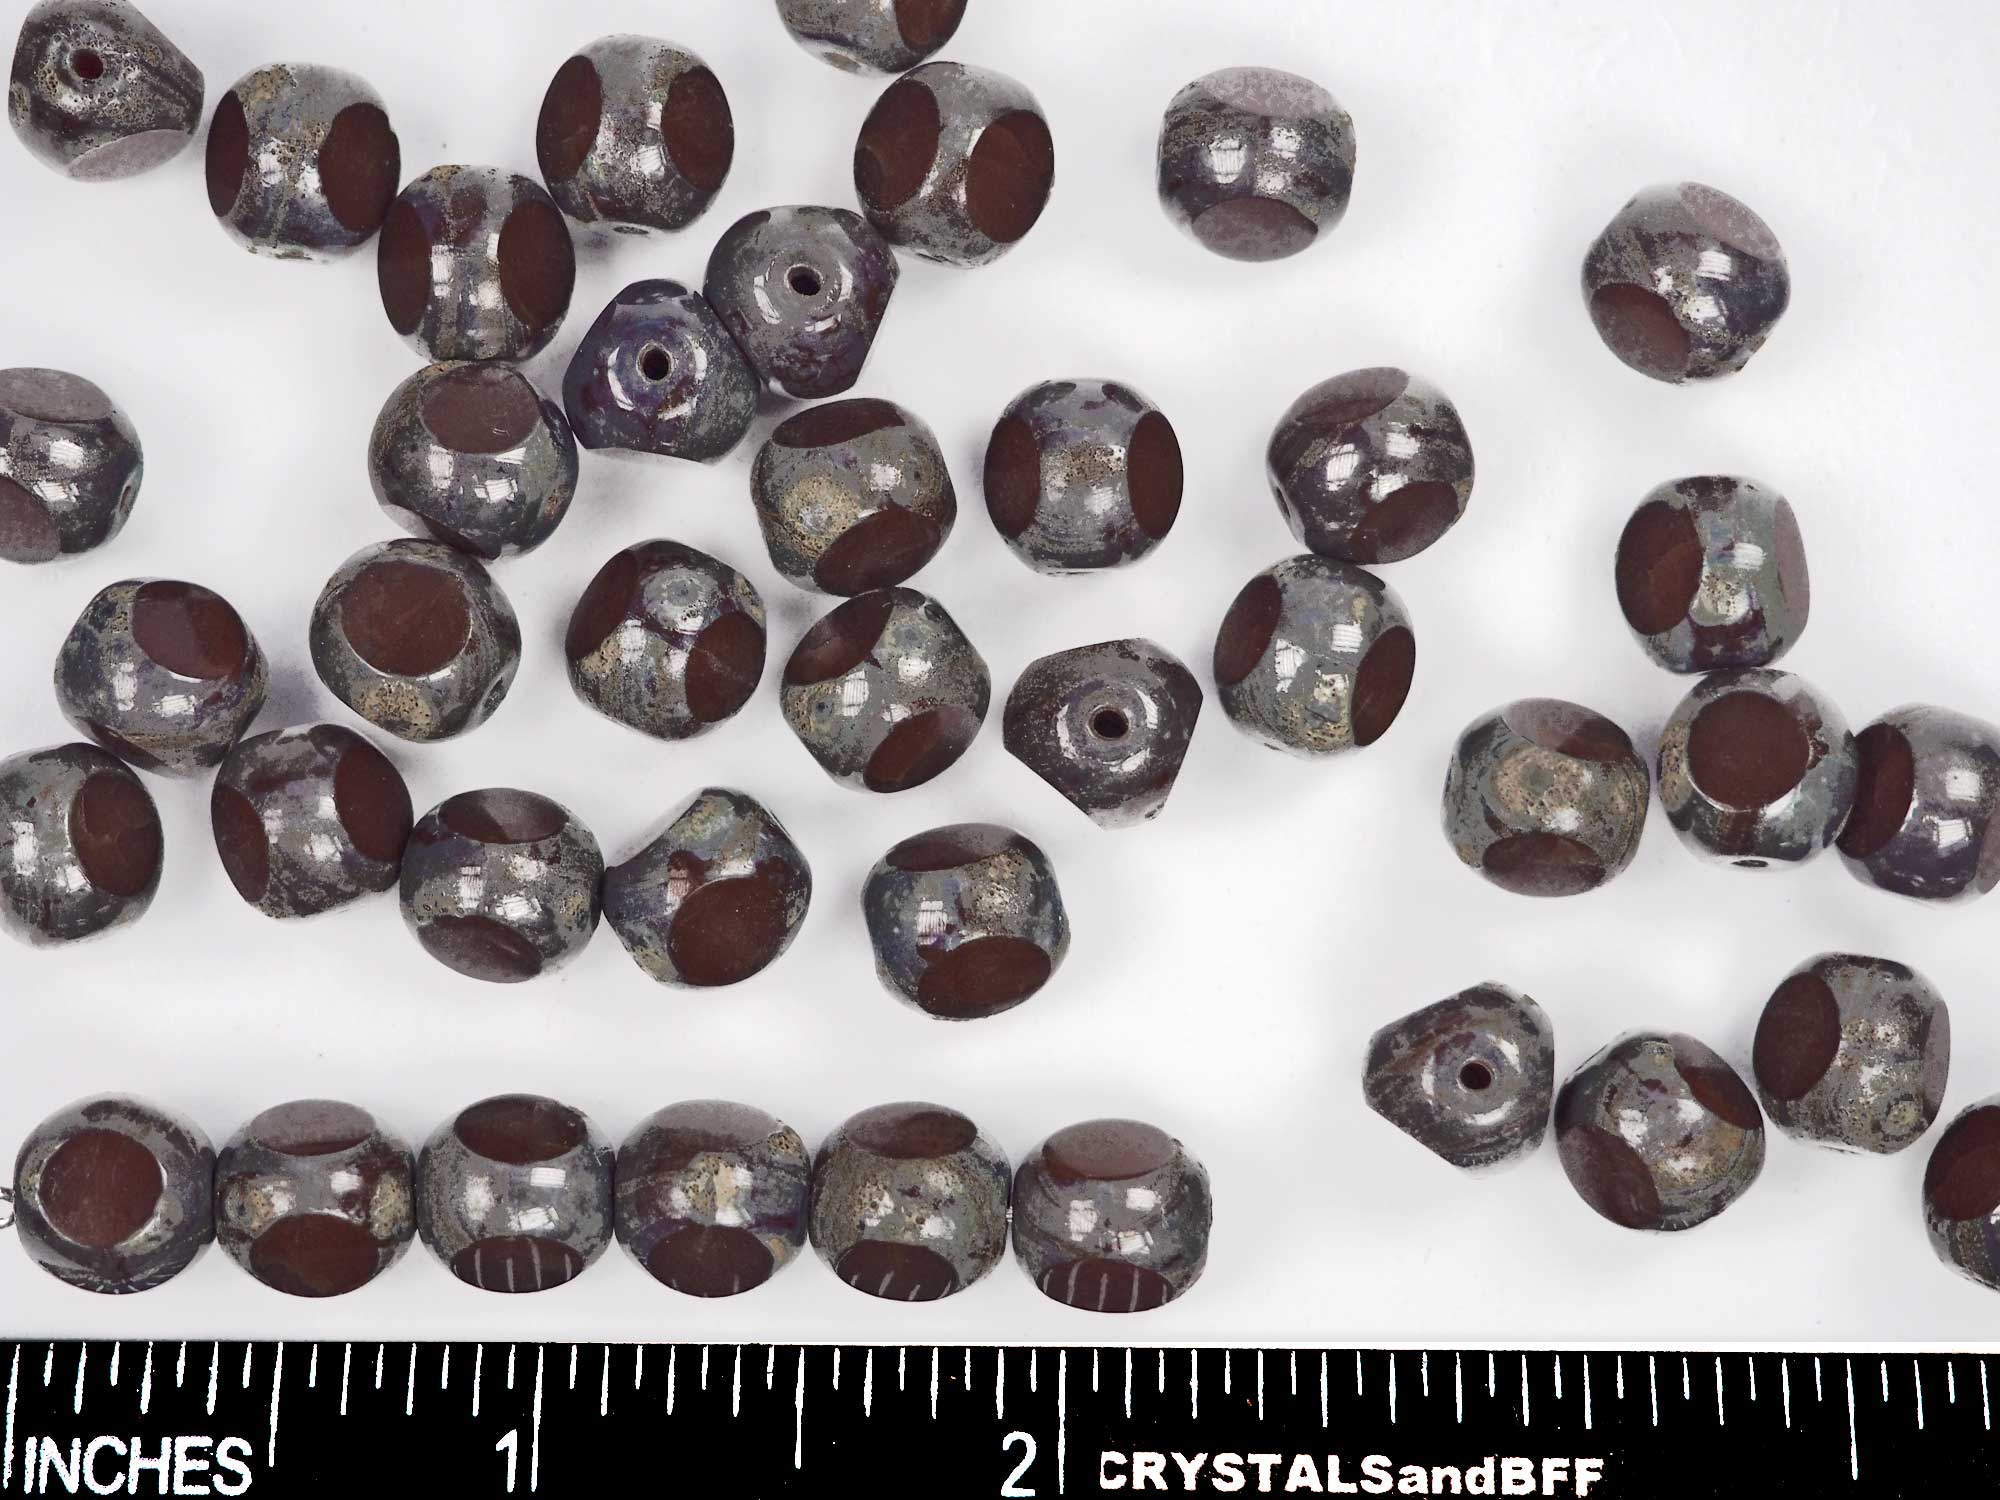 Czech Glass 3-Cut Round Window Beads (Soccer Ball Bead) Art. 151-19501 in size 10mm, Opaque Dark Brown with Picasso coating, 24pcs, P880